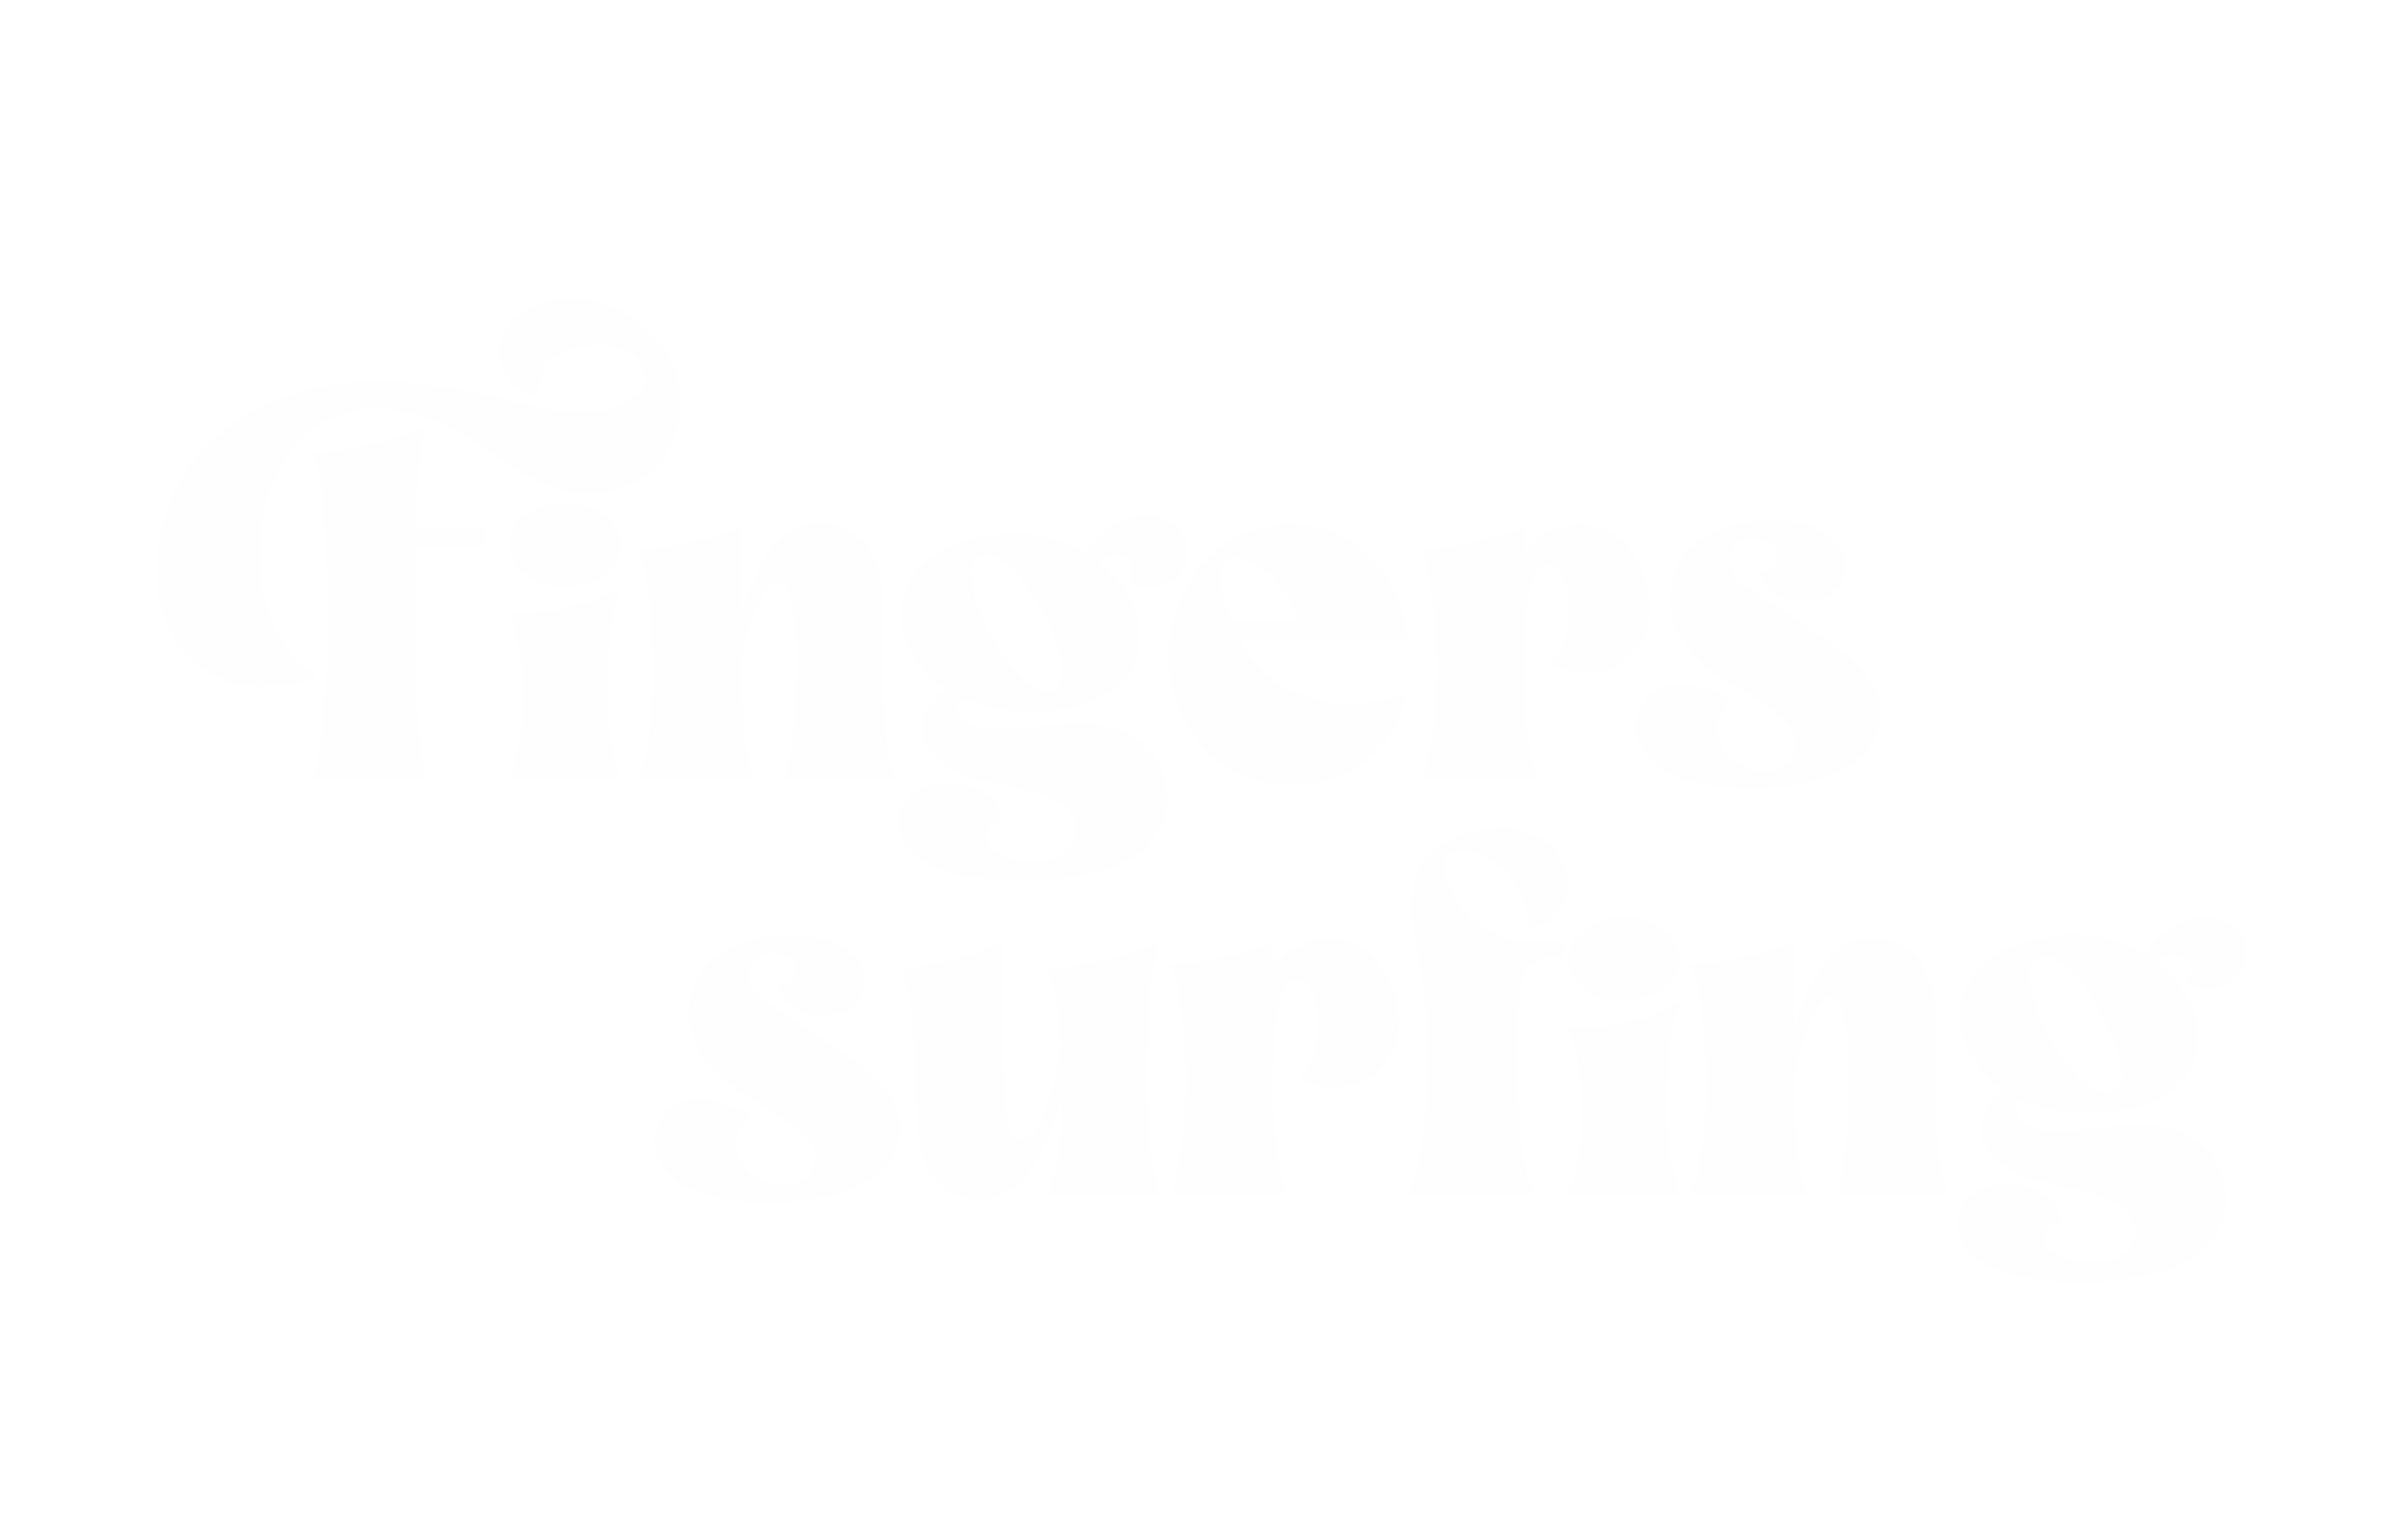 Fingers Surfing